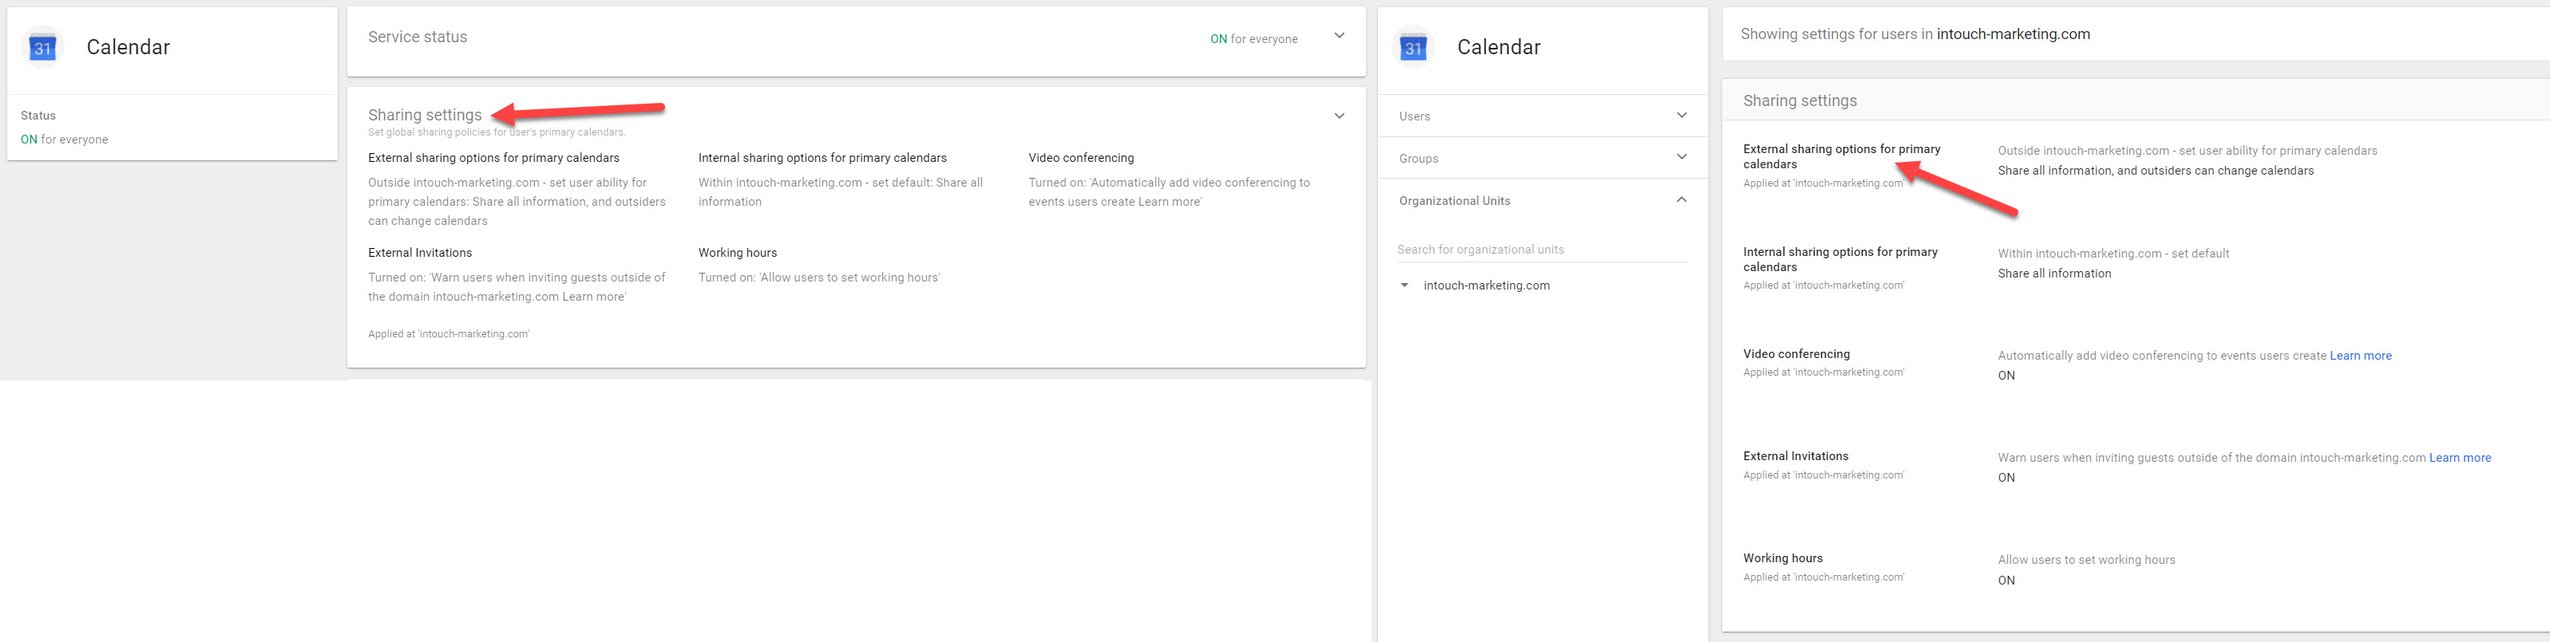 How To Add G Suite Calendar To Outlook